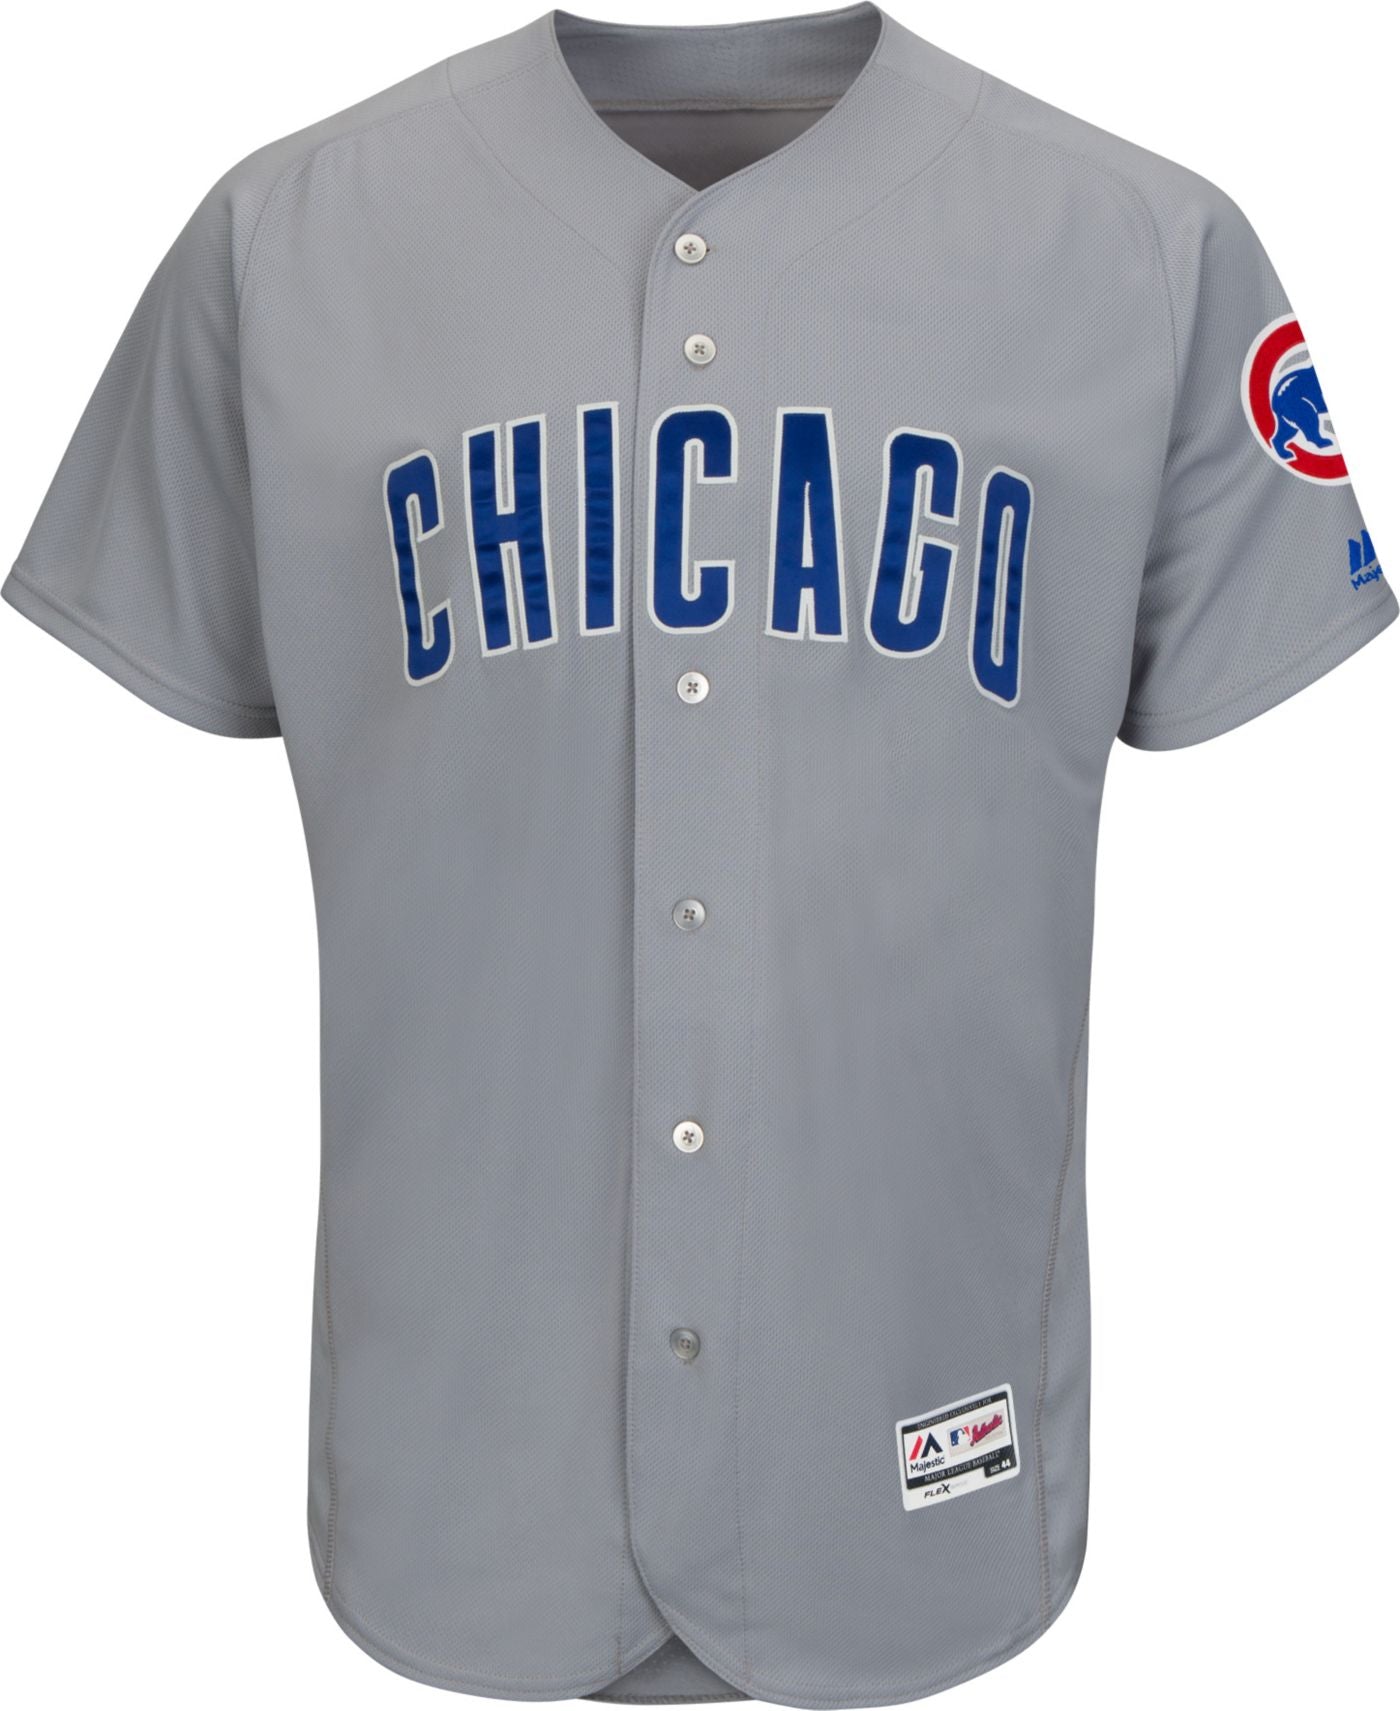 Majestic Men's Authentic Chicago Cubs Road Grey Flex Base On-Field Jersey